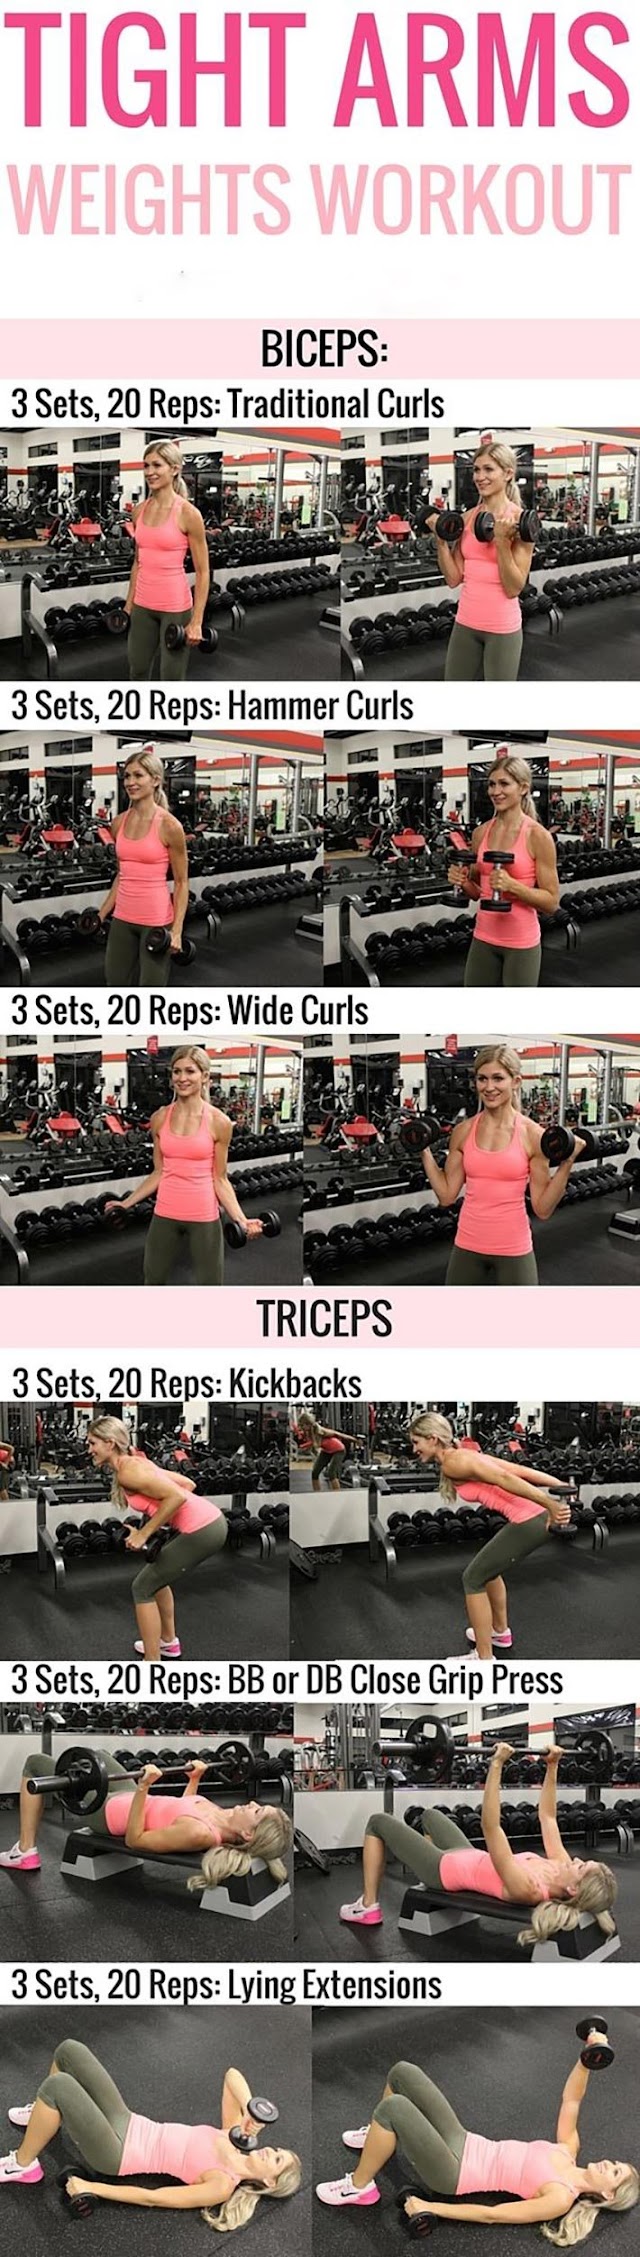 Tight Arms Weights Workout